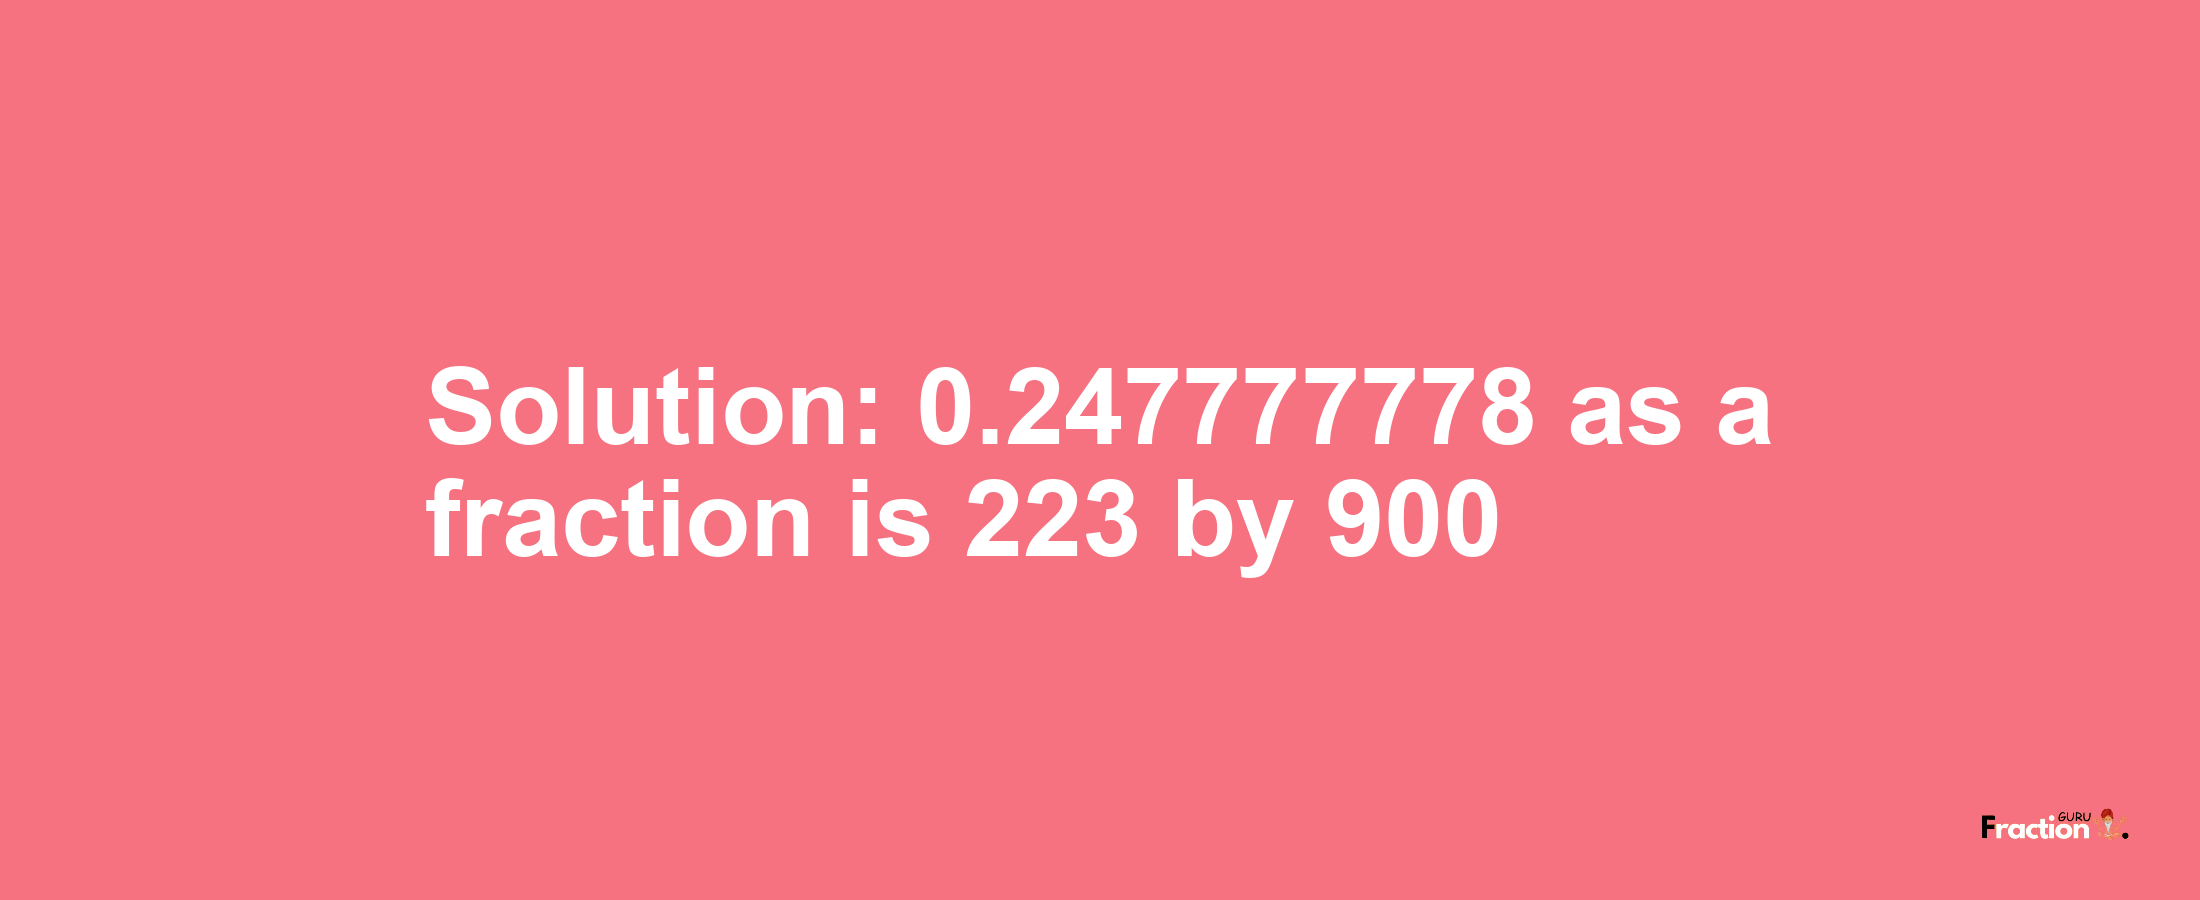 Solution:0.247777778 as a fraction is 223/900